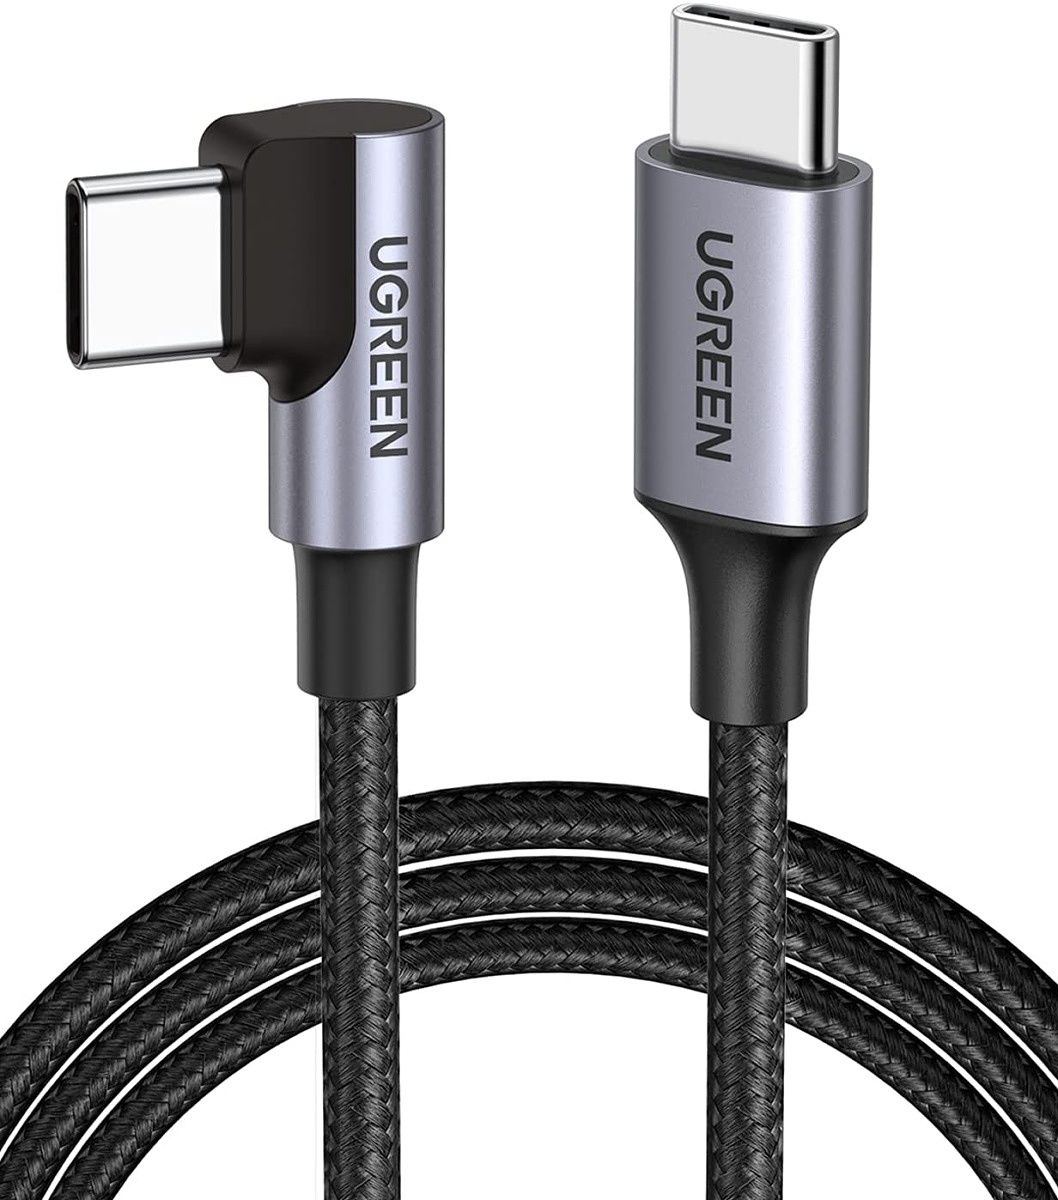 There are situations when an L-shaped or right-angle connector makes more sense than the traditional straight connector. For those situations, Ugreen offers this USB Type-C to Type-C cable that has a right-angle connector on one end and a straight connector on the other.